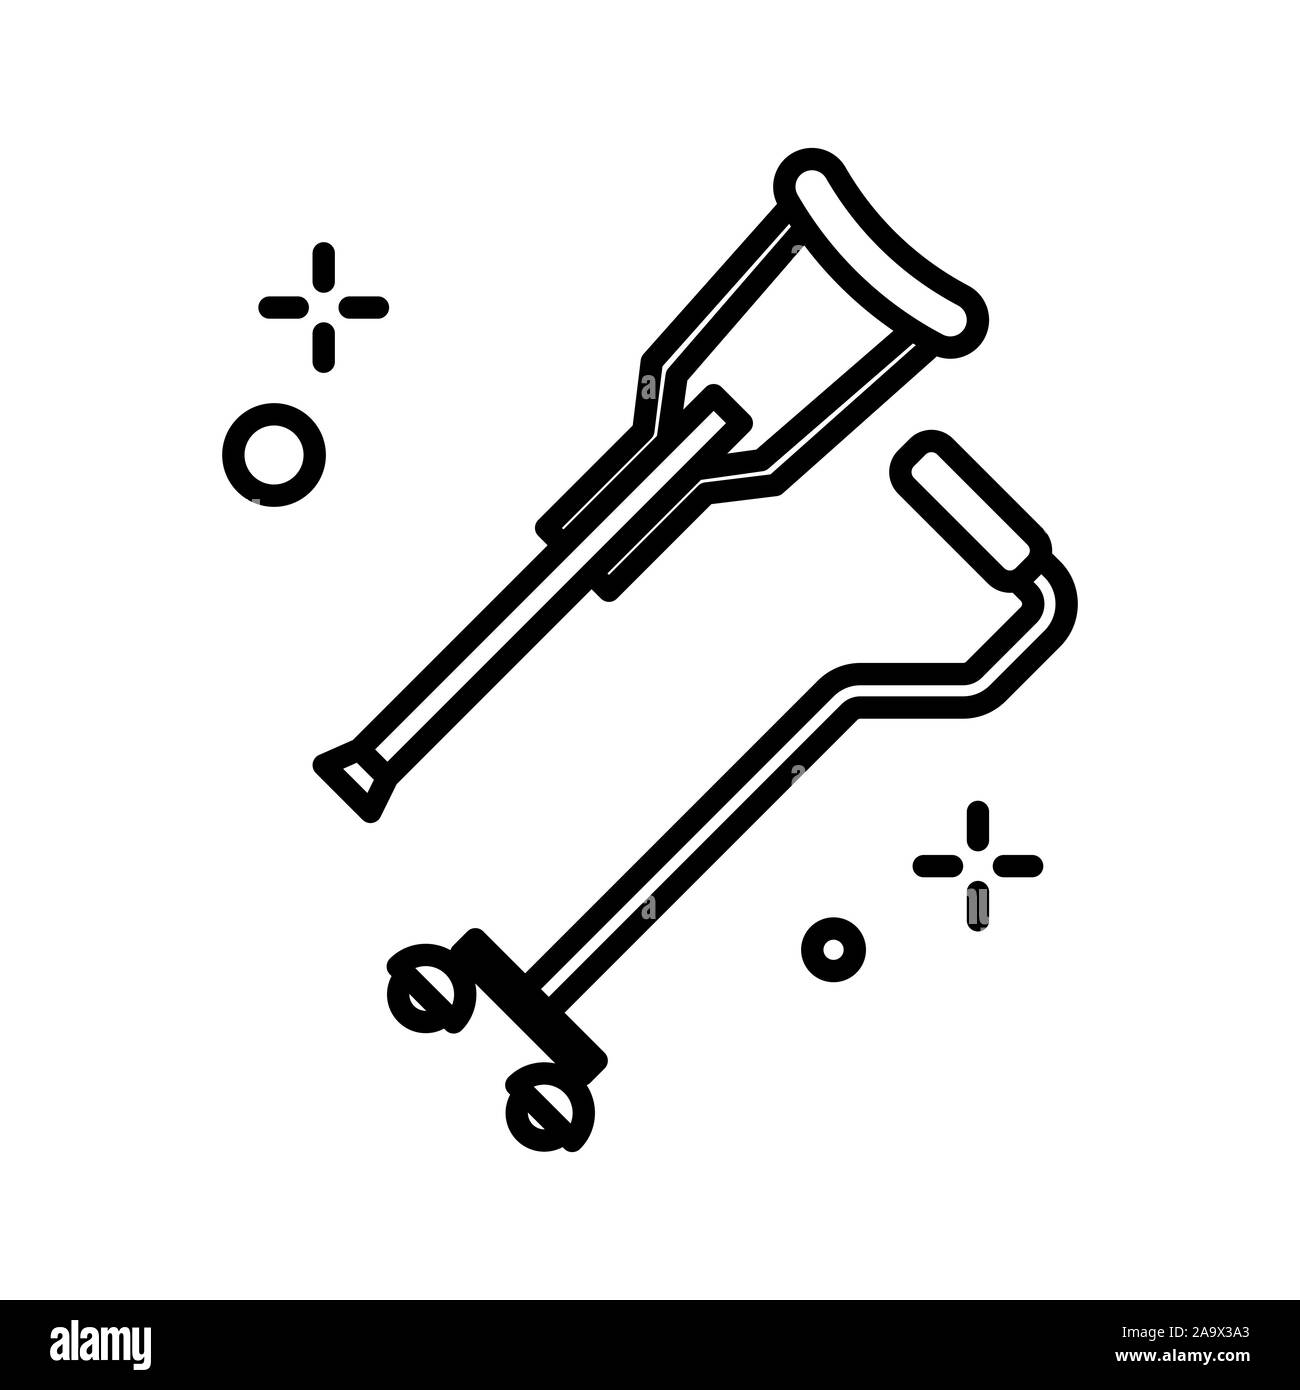 Cane and crutch isolated line icon, walking stick linear symbol Stock Vector